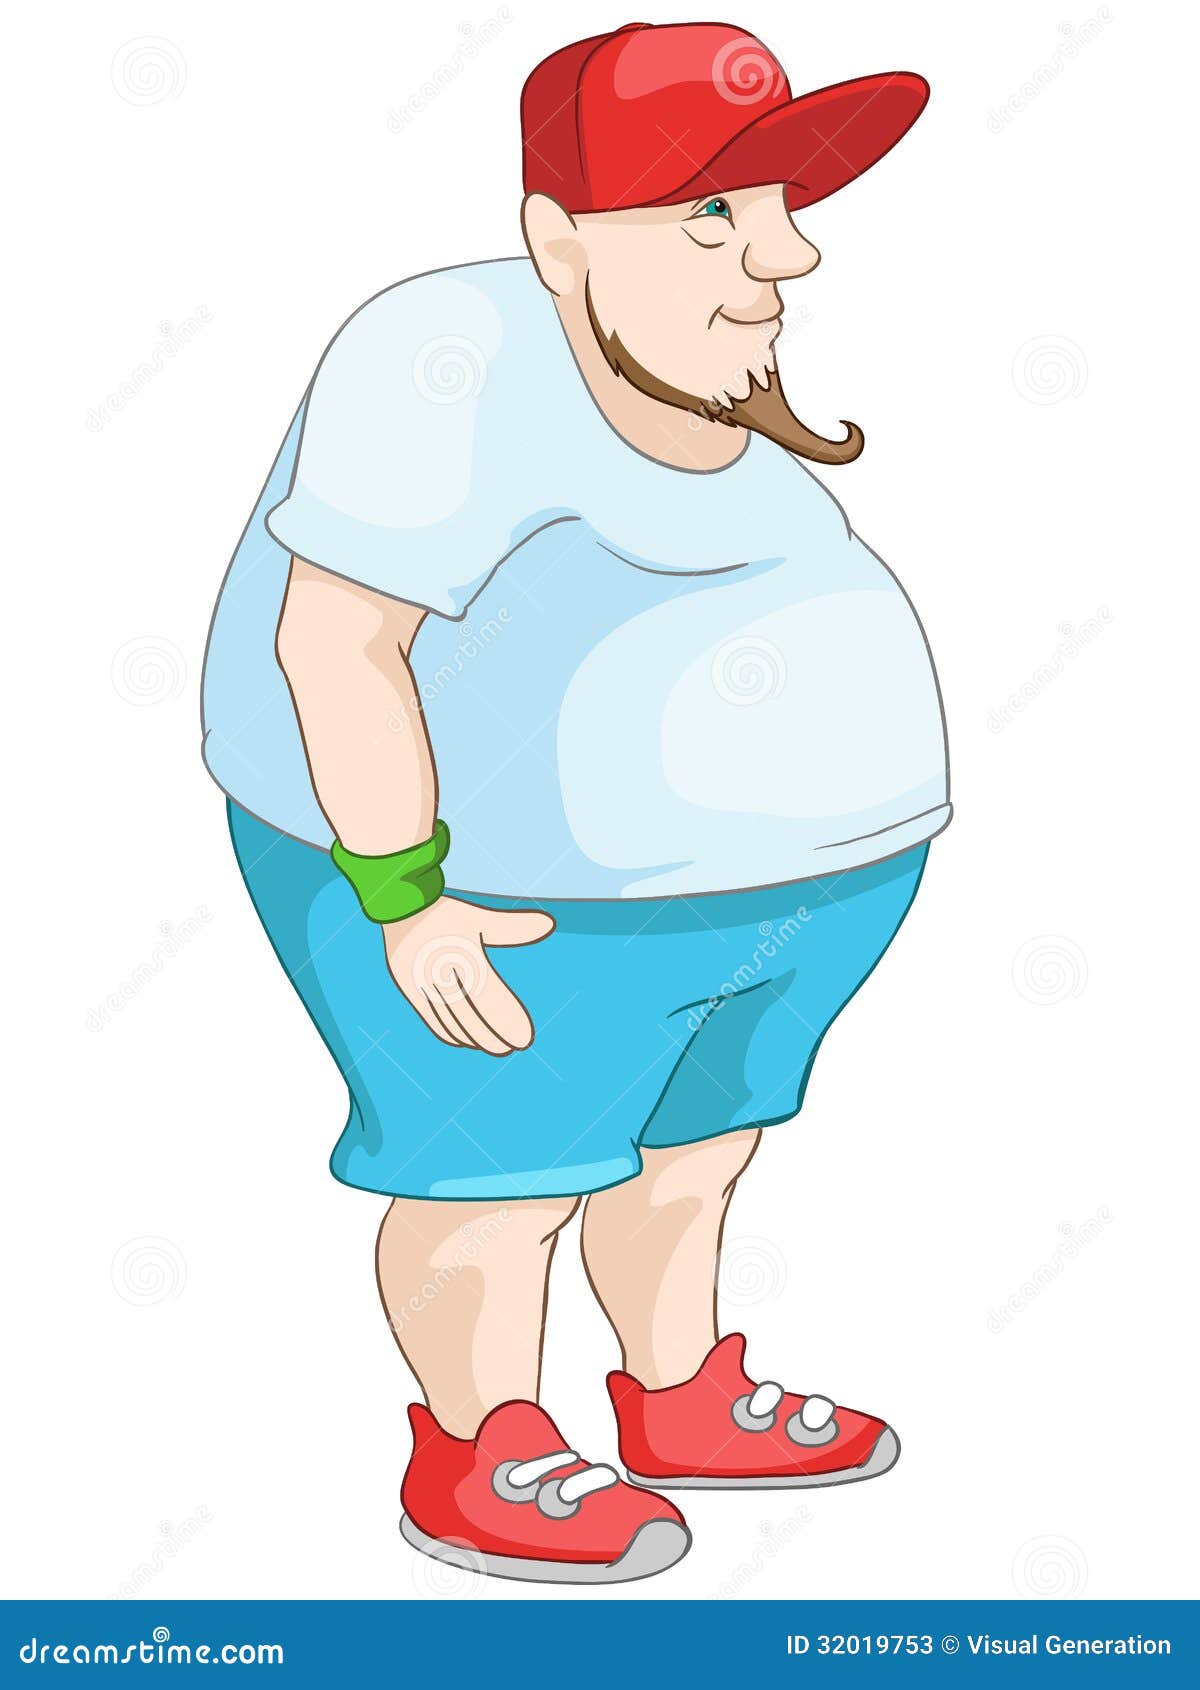 Cheerful Chubby Man stock vector. Illustration of decisions - 32019753